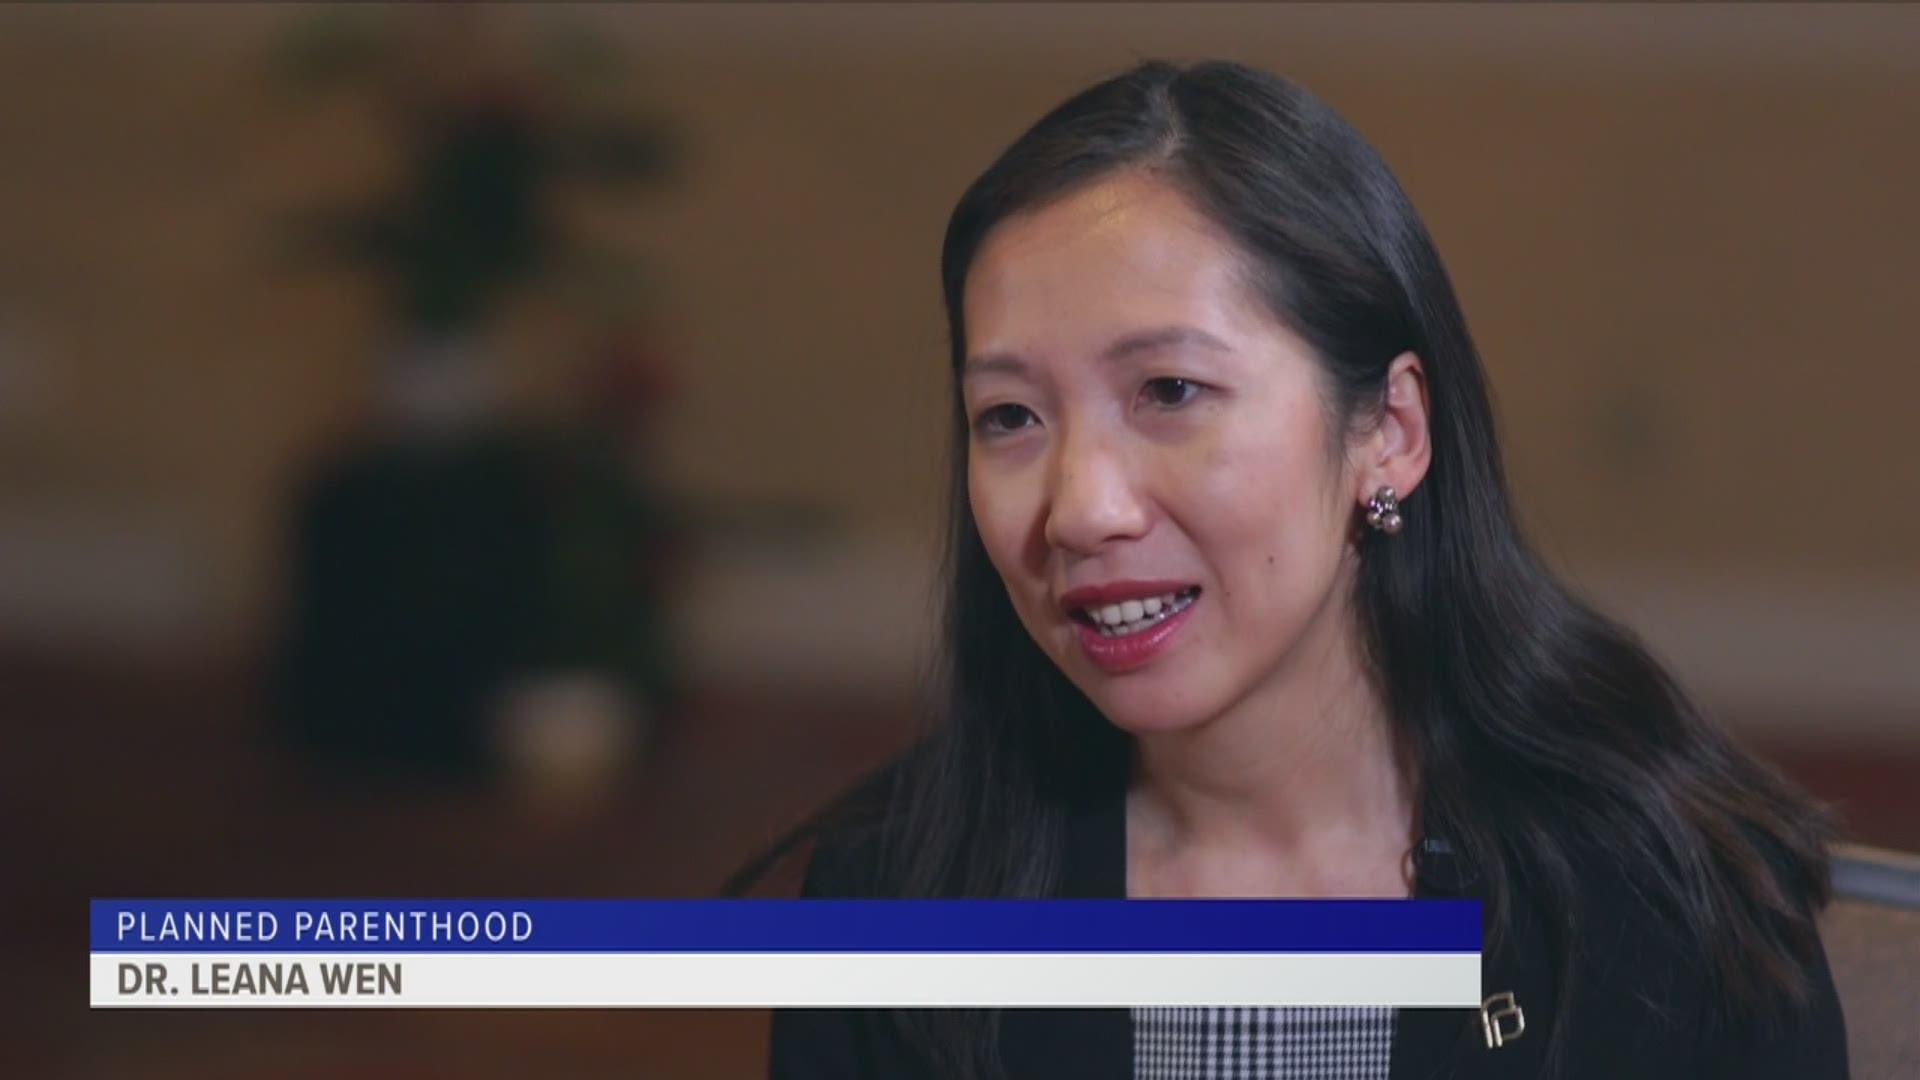 As the first physician in 50 years to lead Planned Parenthood, Dr. Leana Wen discusses how her plans for the health care provider.